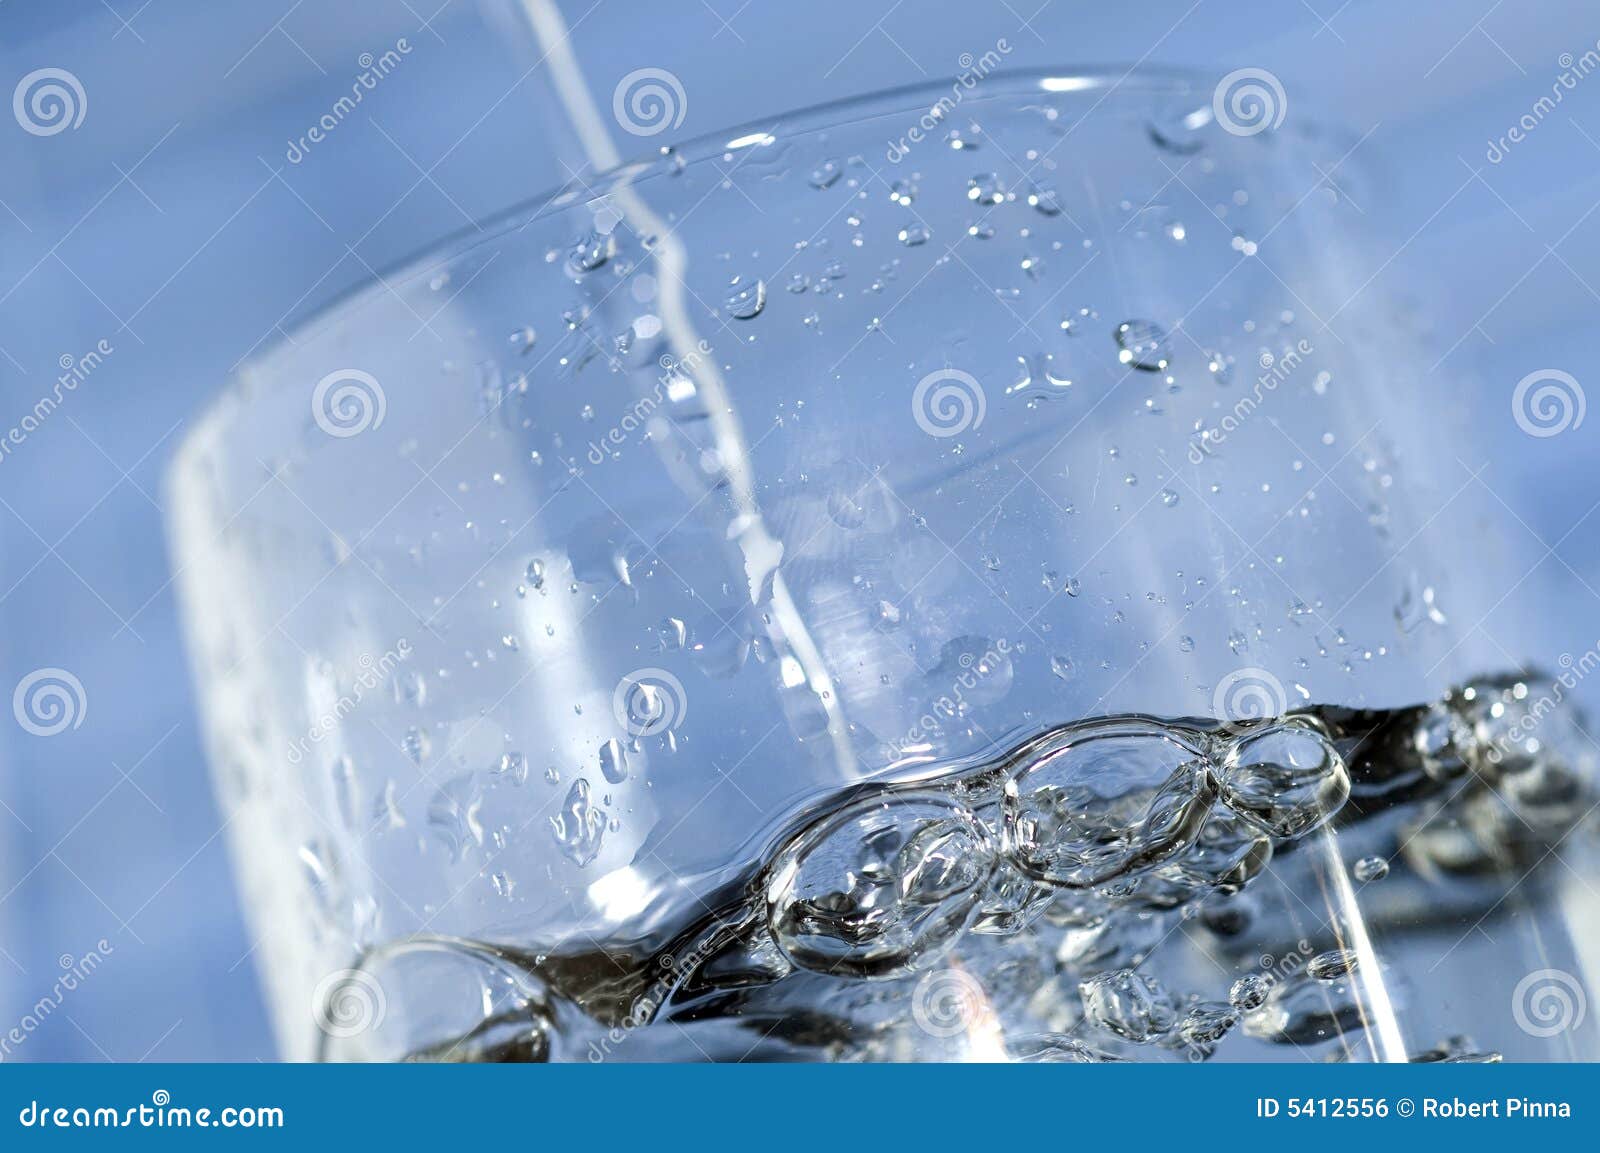 fresh water and a glass